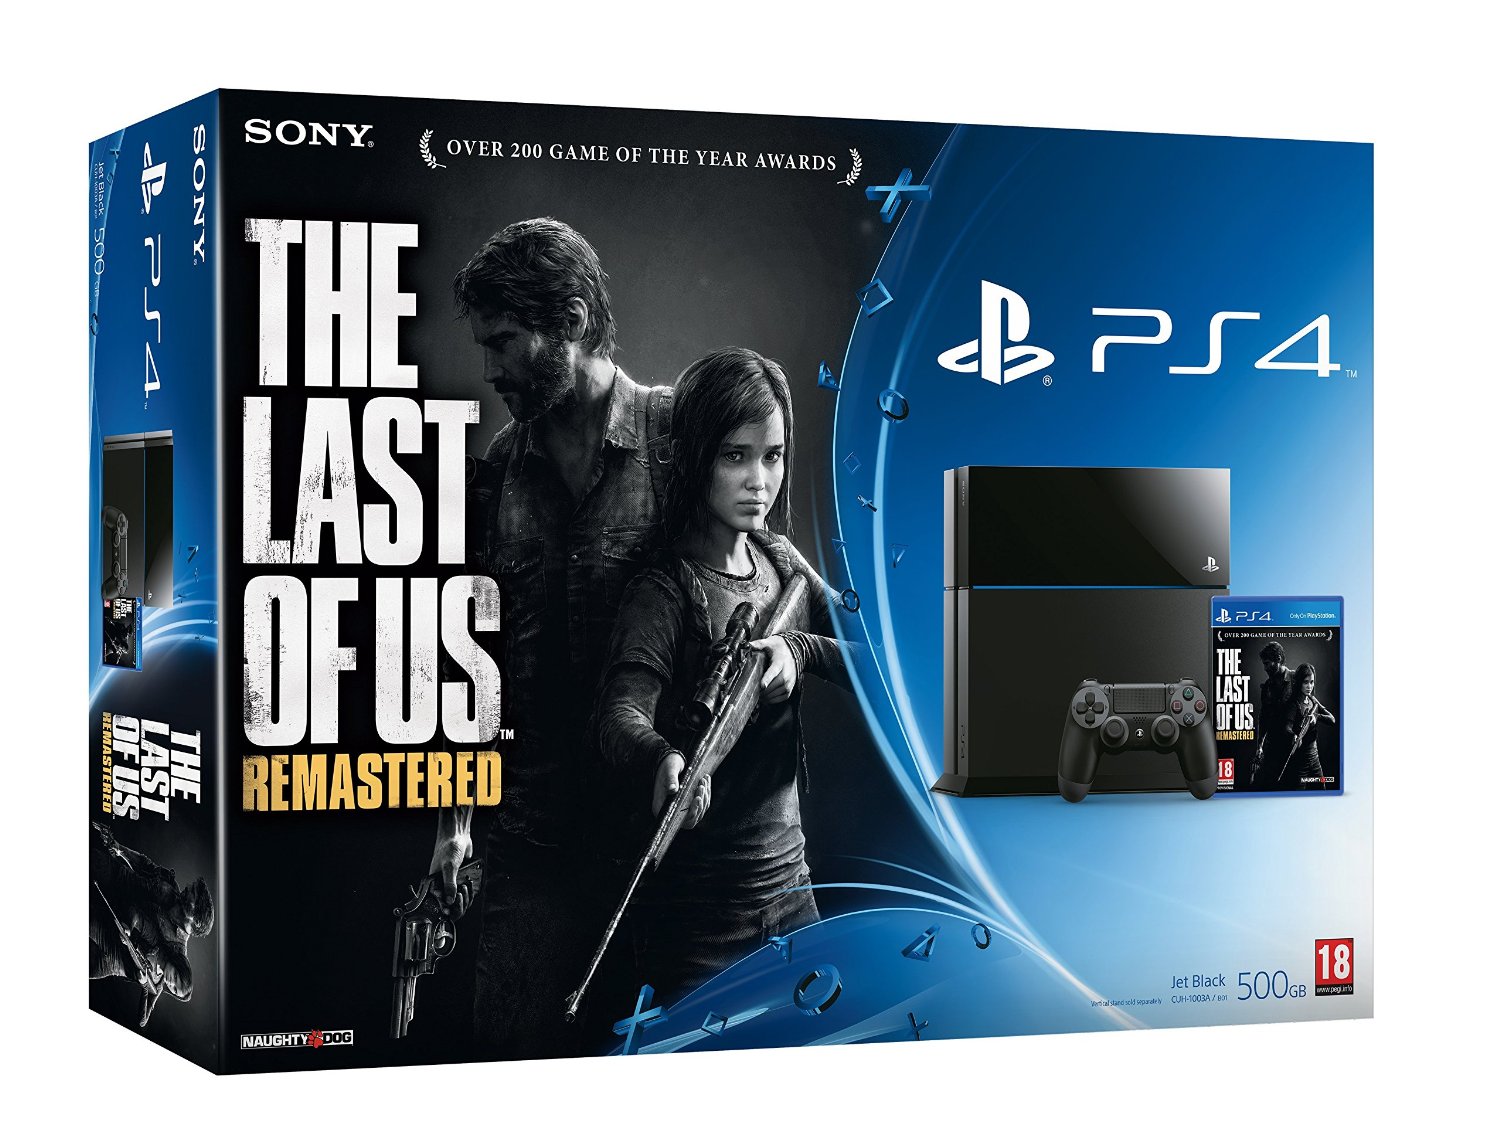 The Last of Us Remastered PlayStation 4 Bundle